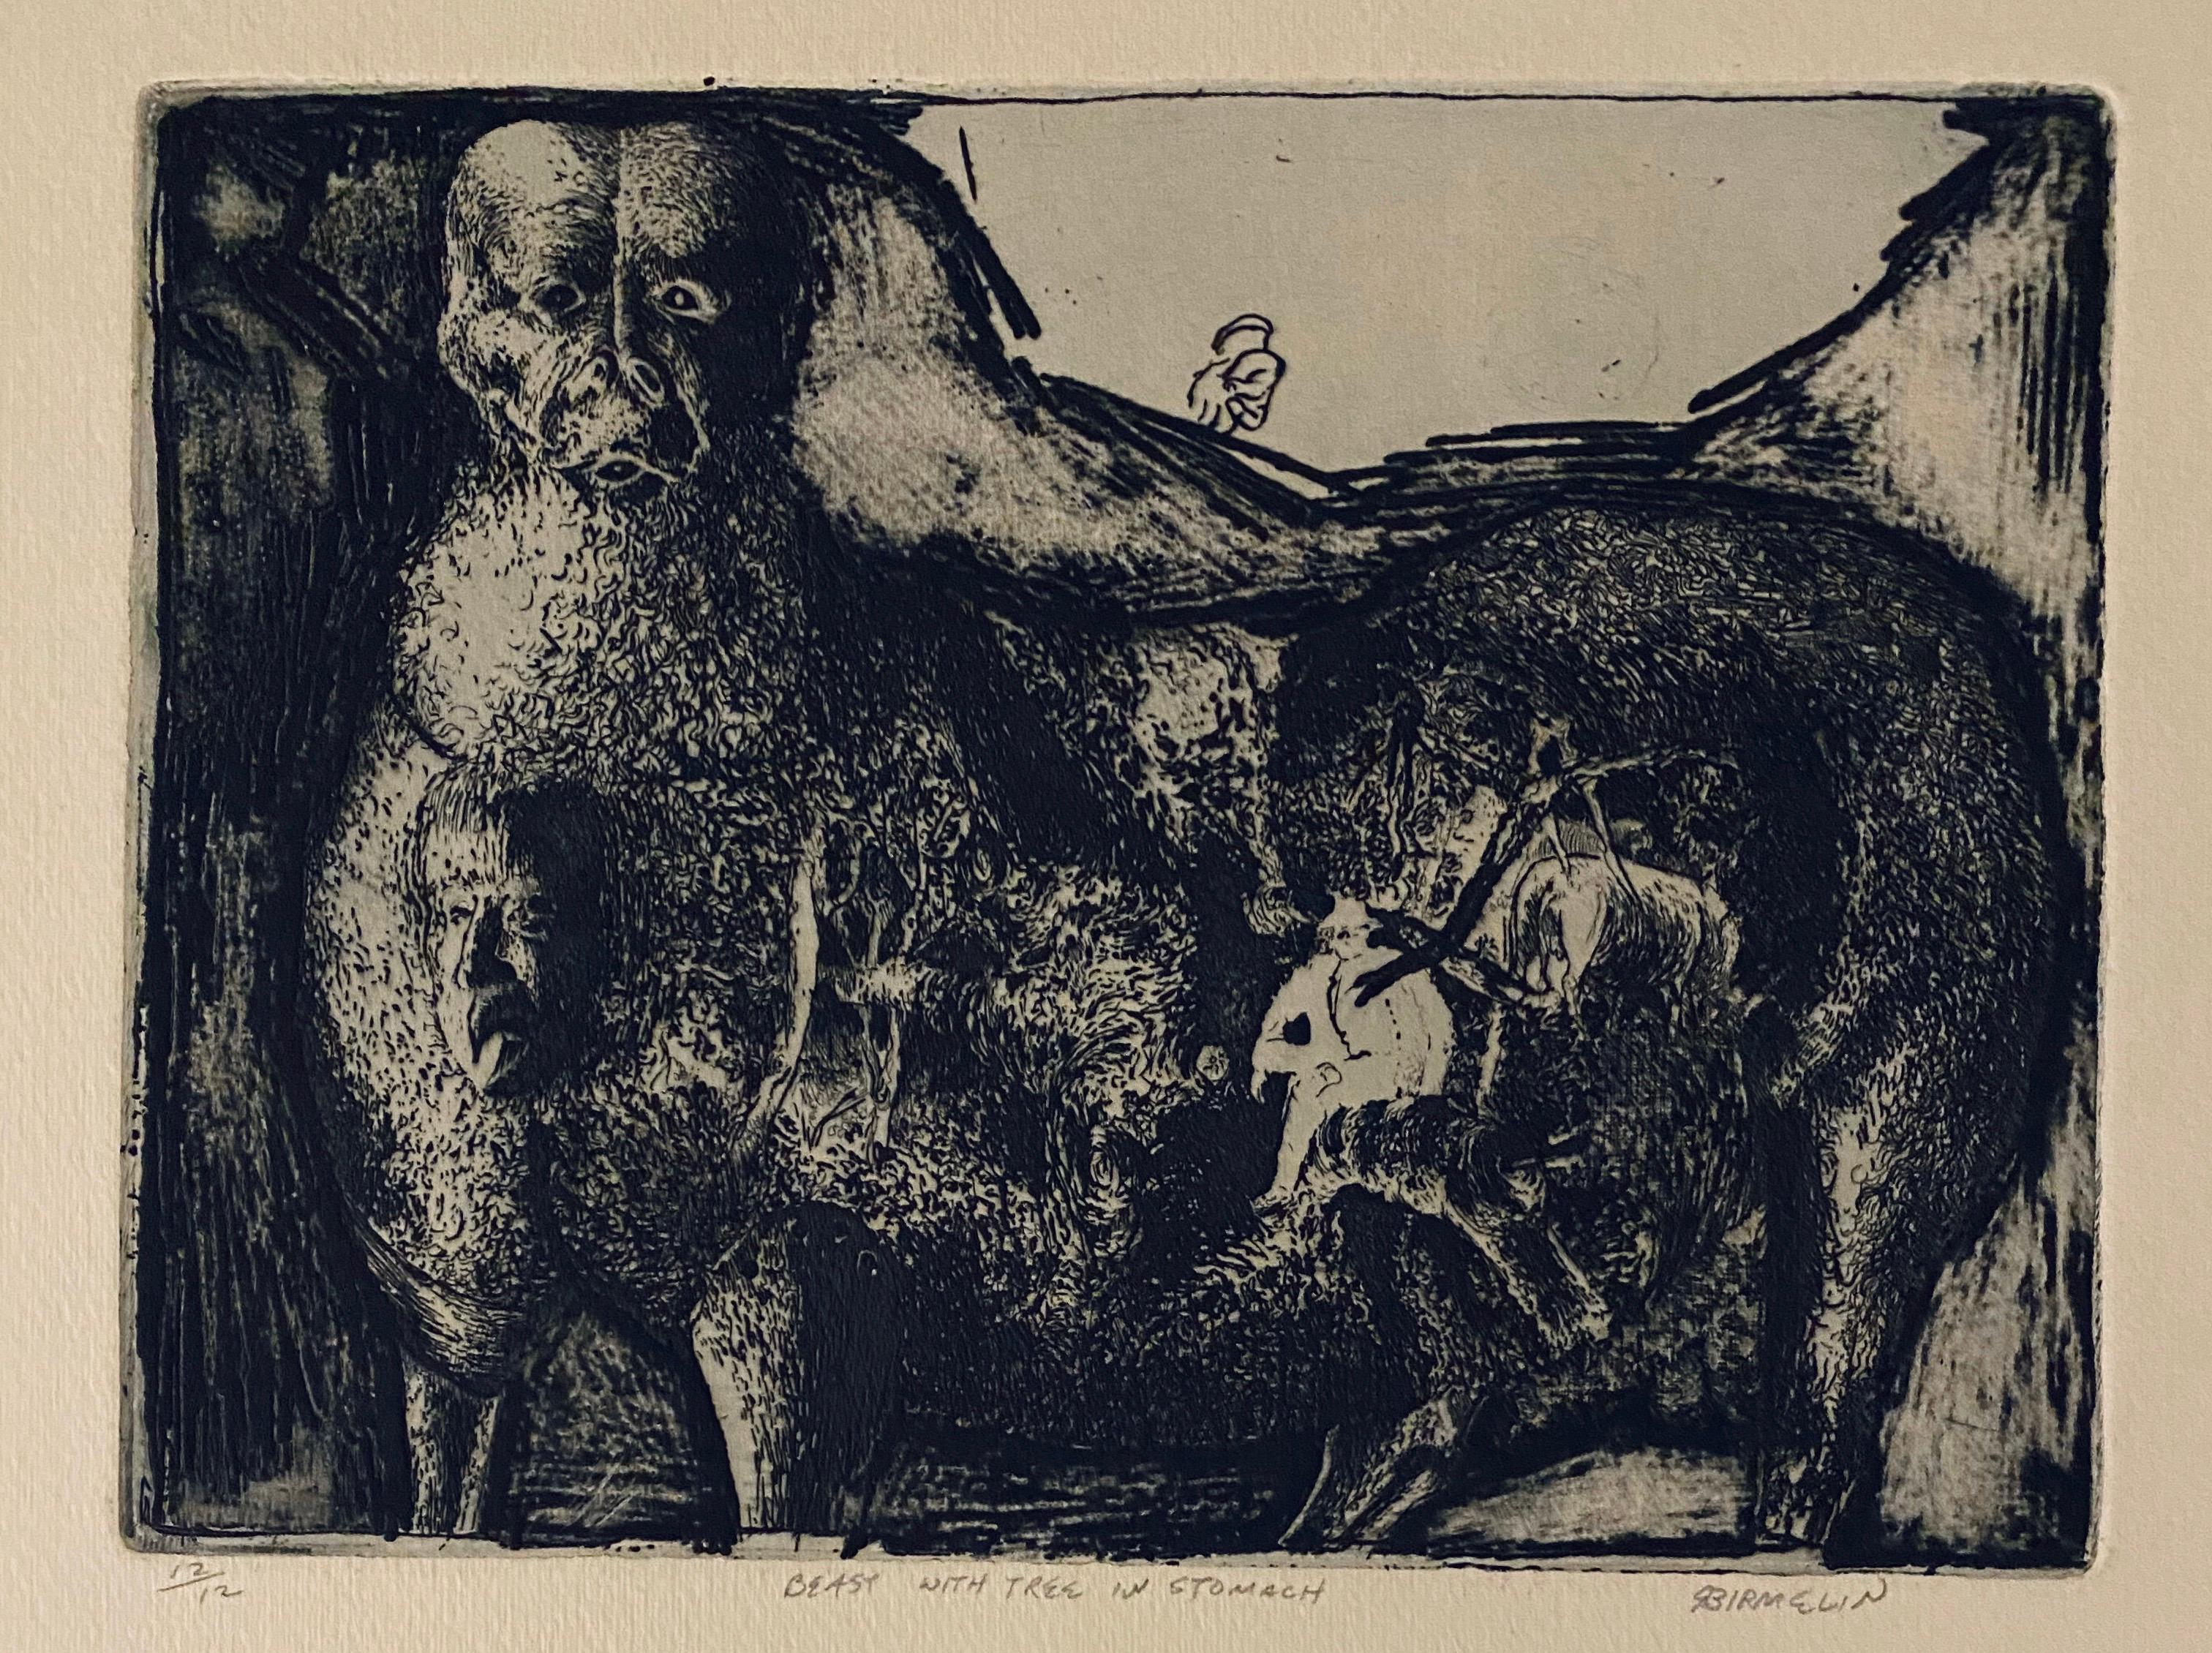 Robert A. Birmelin Interior Print - Beast With Tree In Stomach, American Modernist Abstract Etching